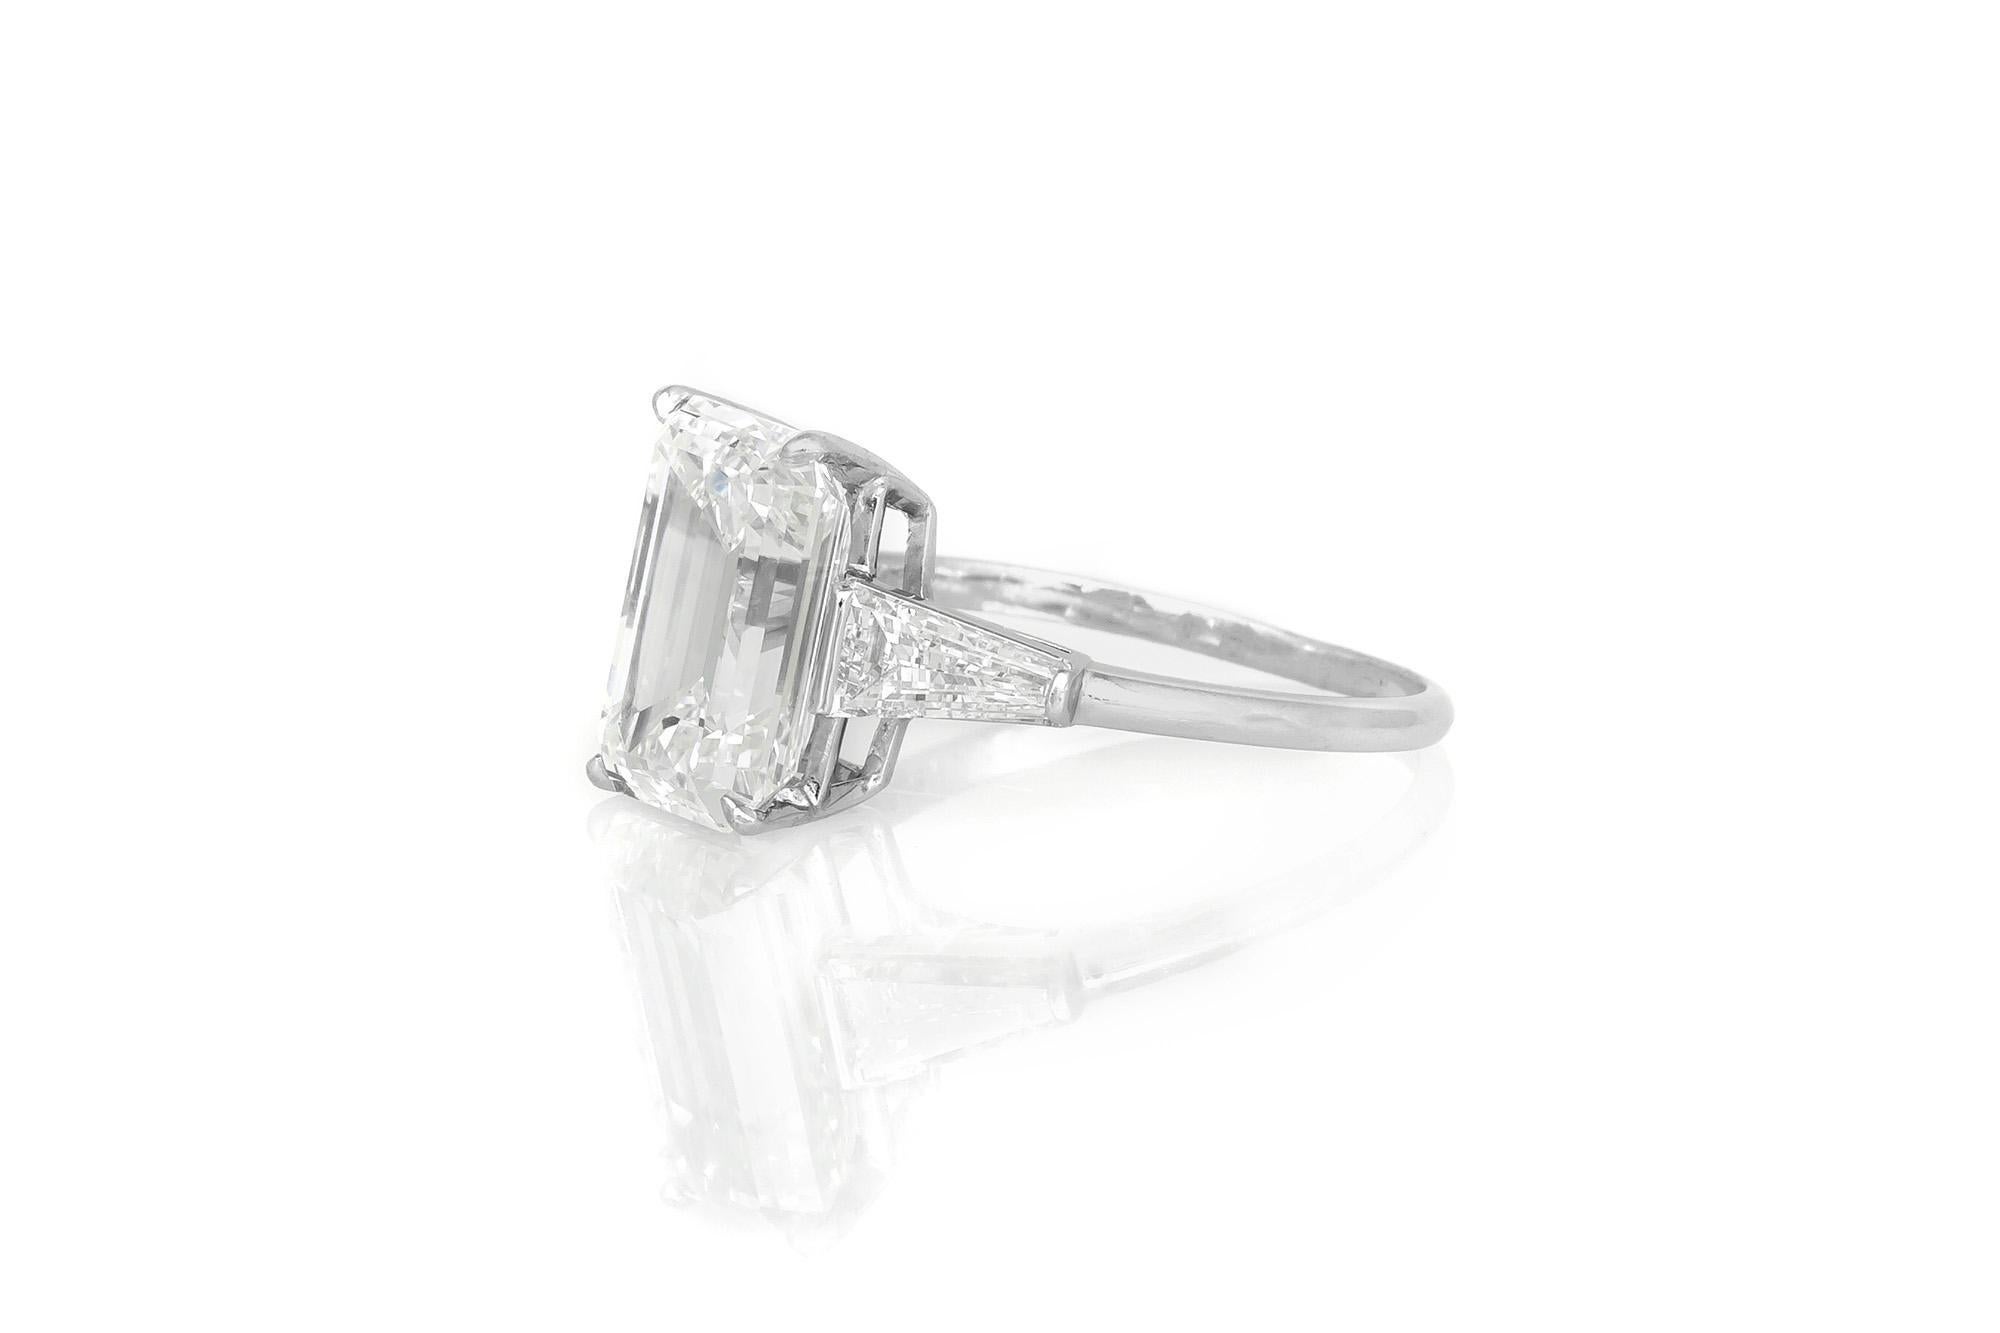 Finely crafted in platinum with a GIA certified Emerald cut Diamond weighing 5.31 carats, G color, VVS2 clarity, GIA #12853547.
The ring features two Tapered Baguette cut Diamonds on the setting.
Size 7 3/4, resizable